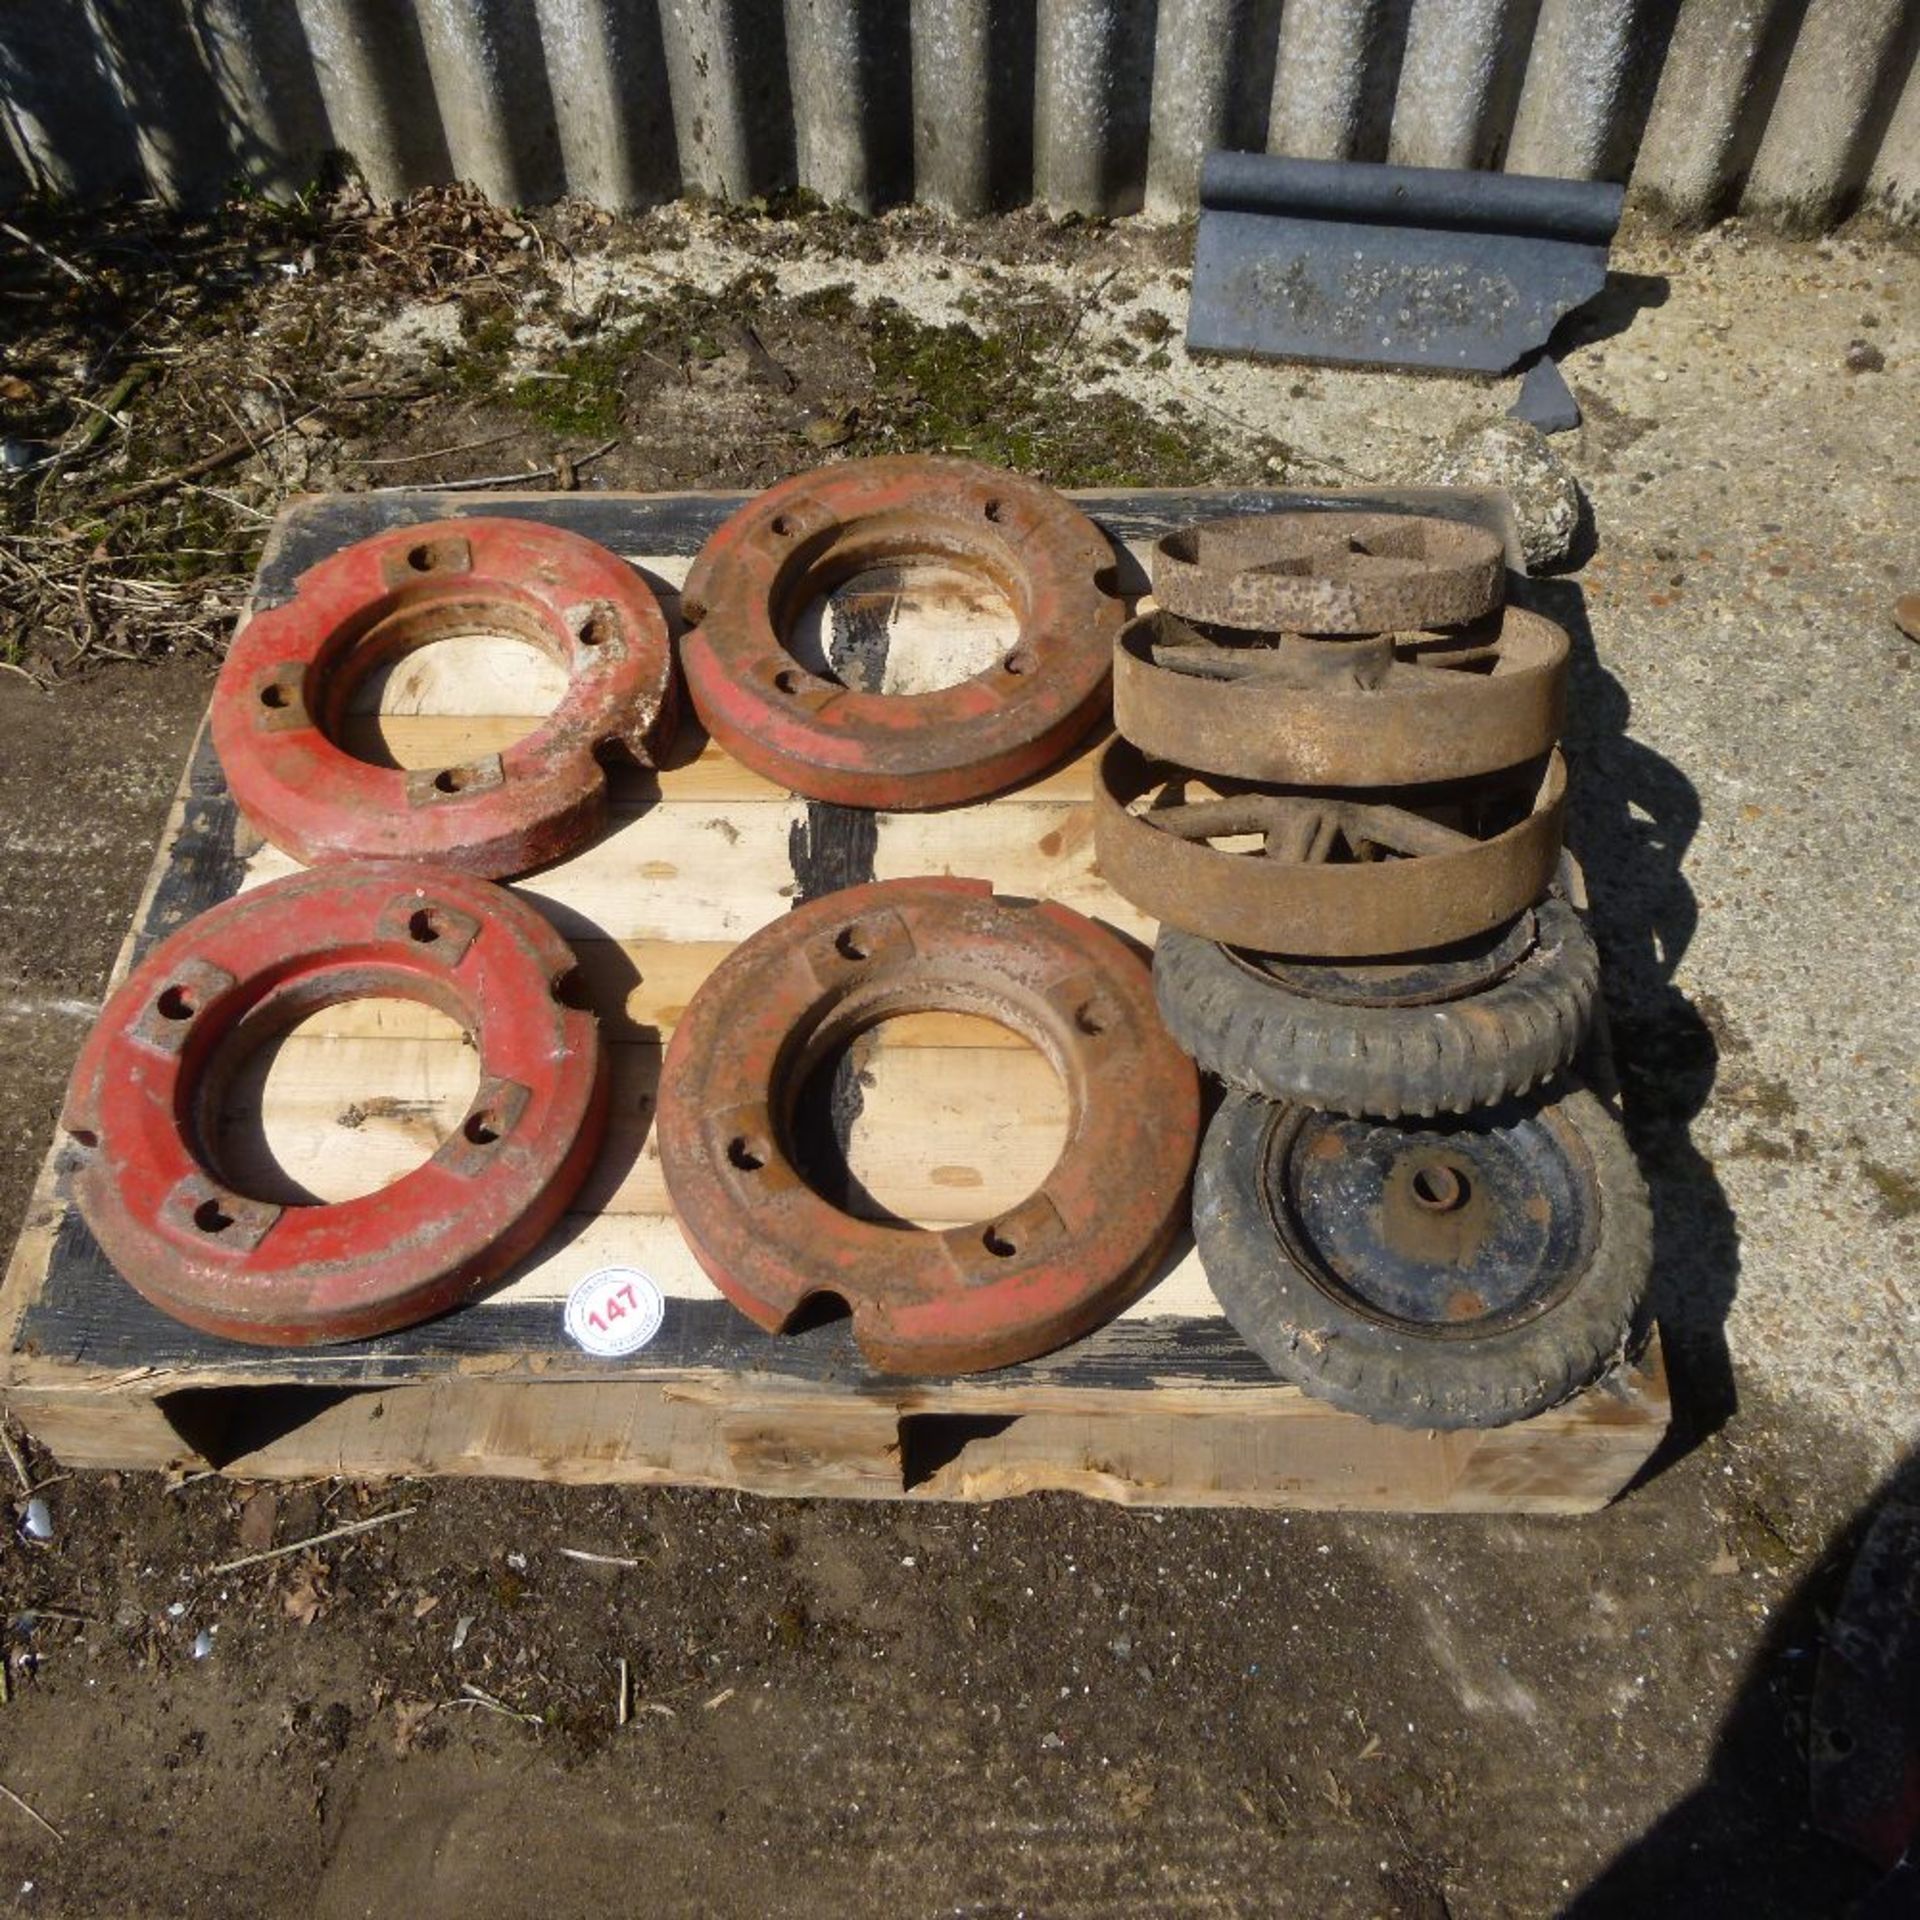 Quantity of wheels and weights